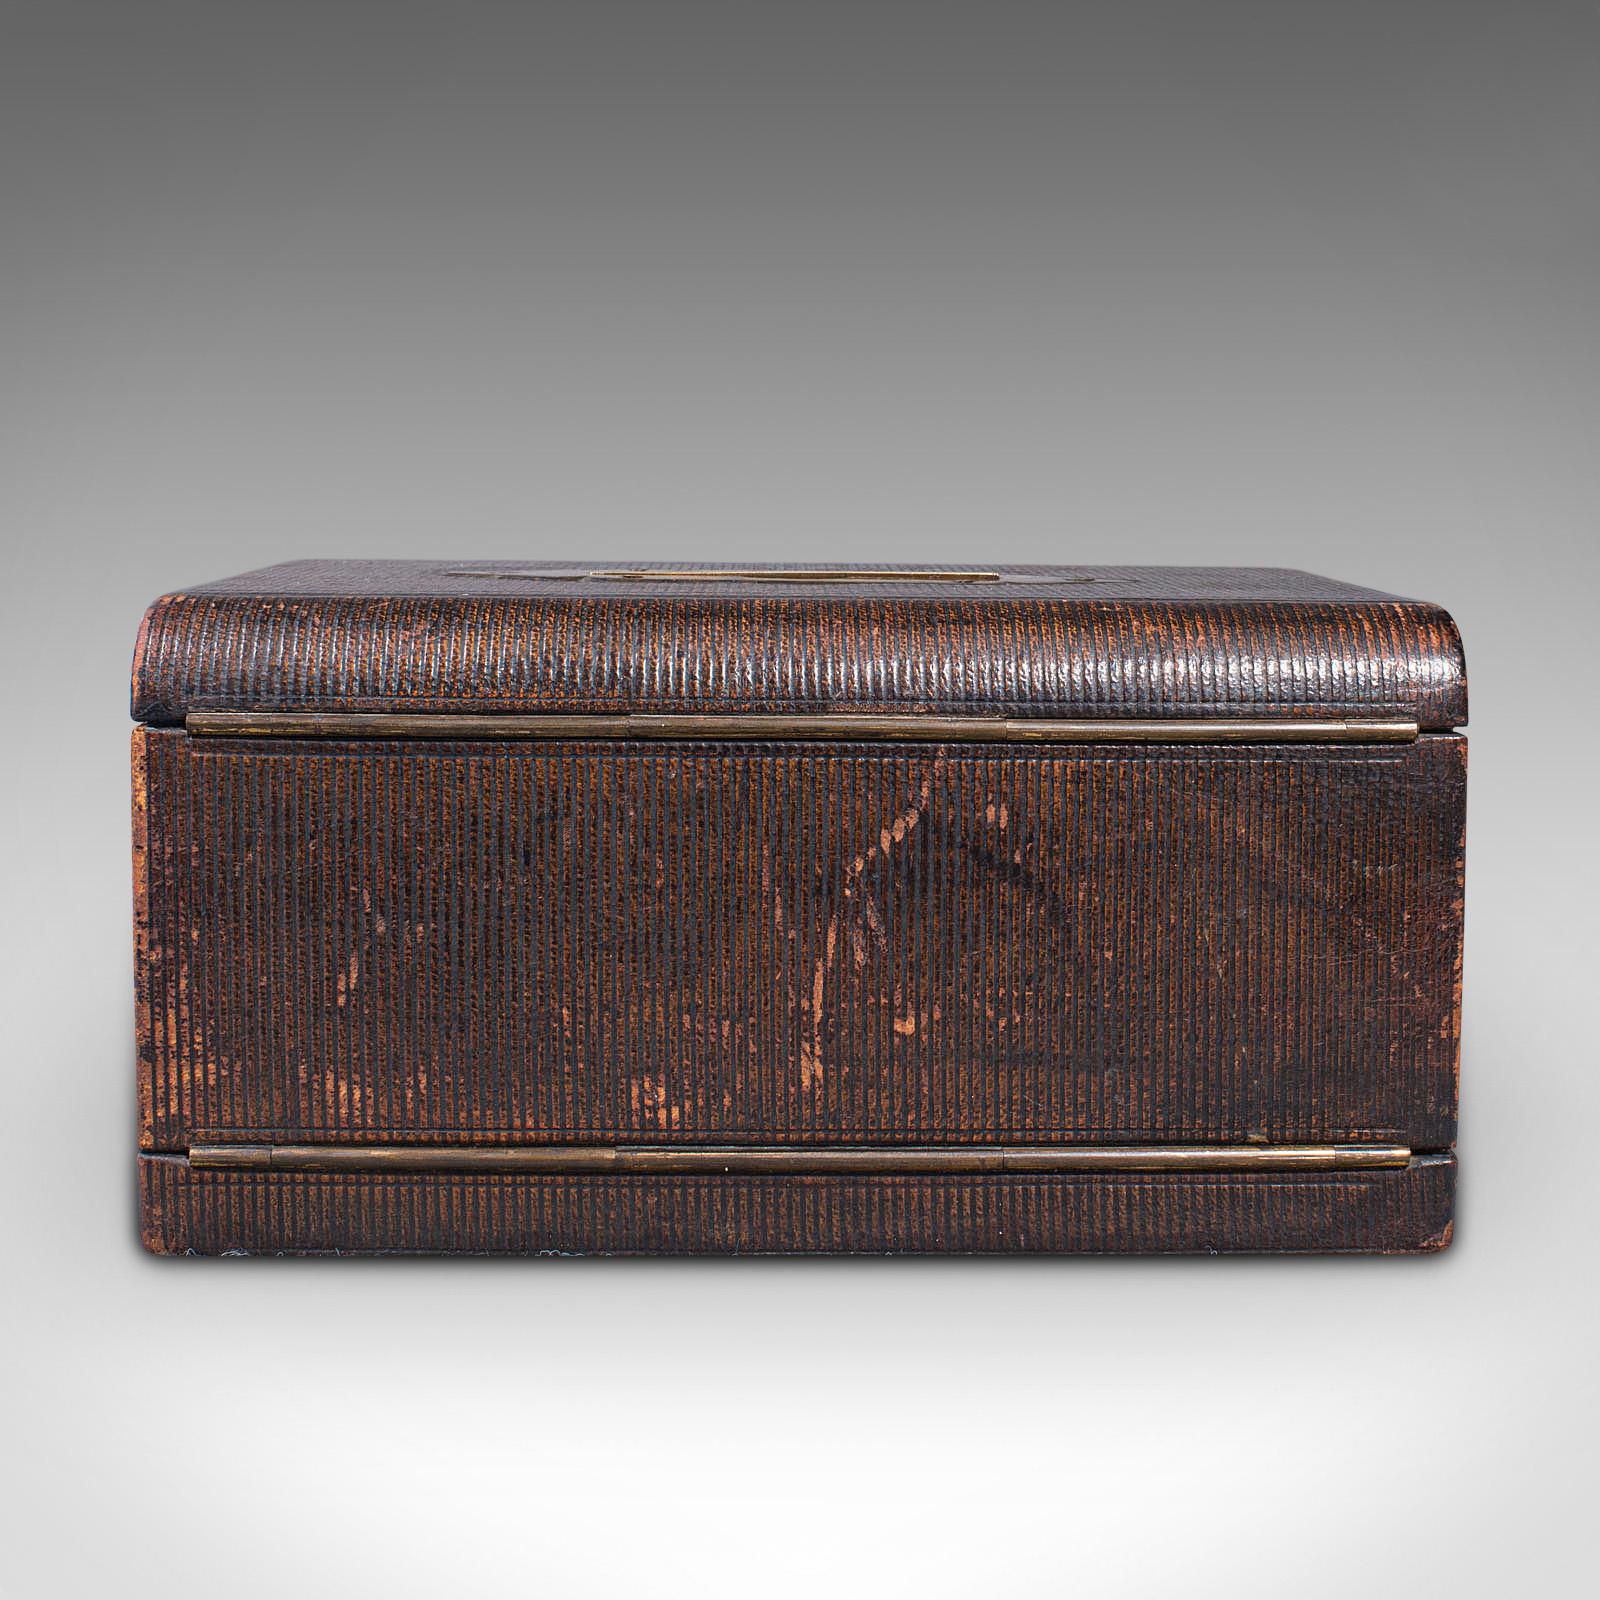 Leather Antique Travelling Vanity Box, English, Campaign Correspondence Case, Victorian For Sale